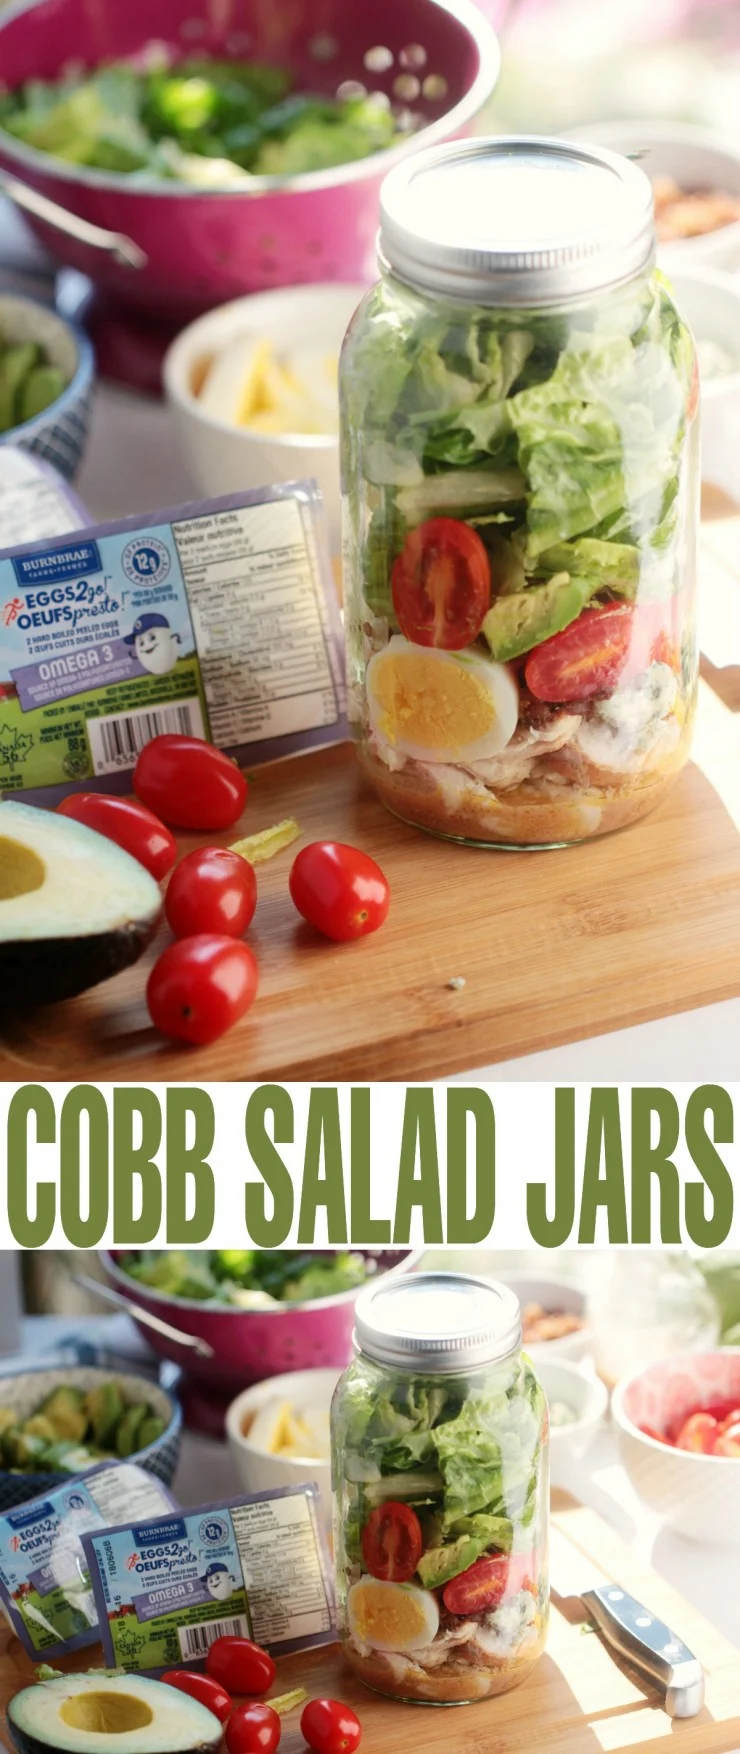 his Cobb Salad in a Jar recipe is a great way to make your weekdays easier by preparing them ahead of time so you can grab and go. It's a nutritious and filling salad packed full of protein.